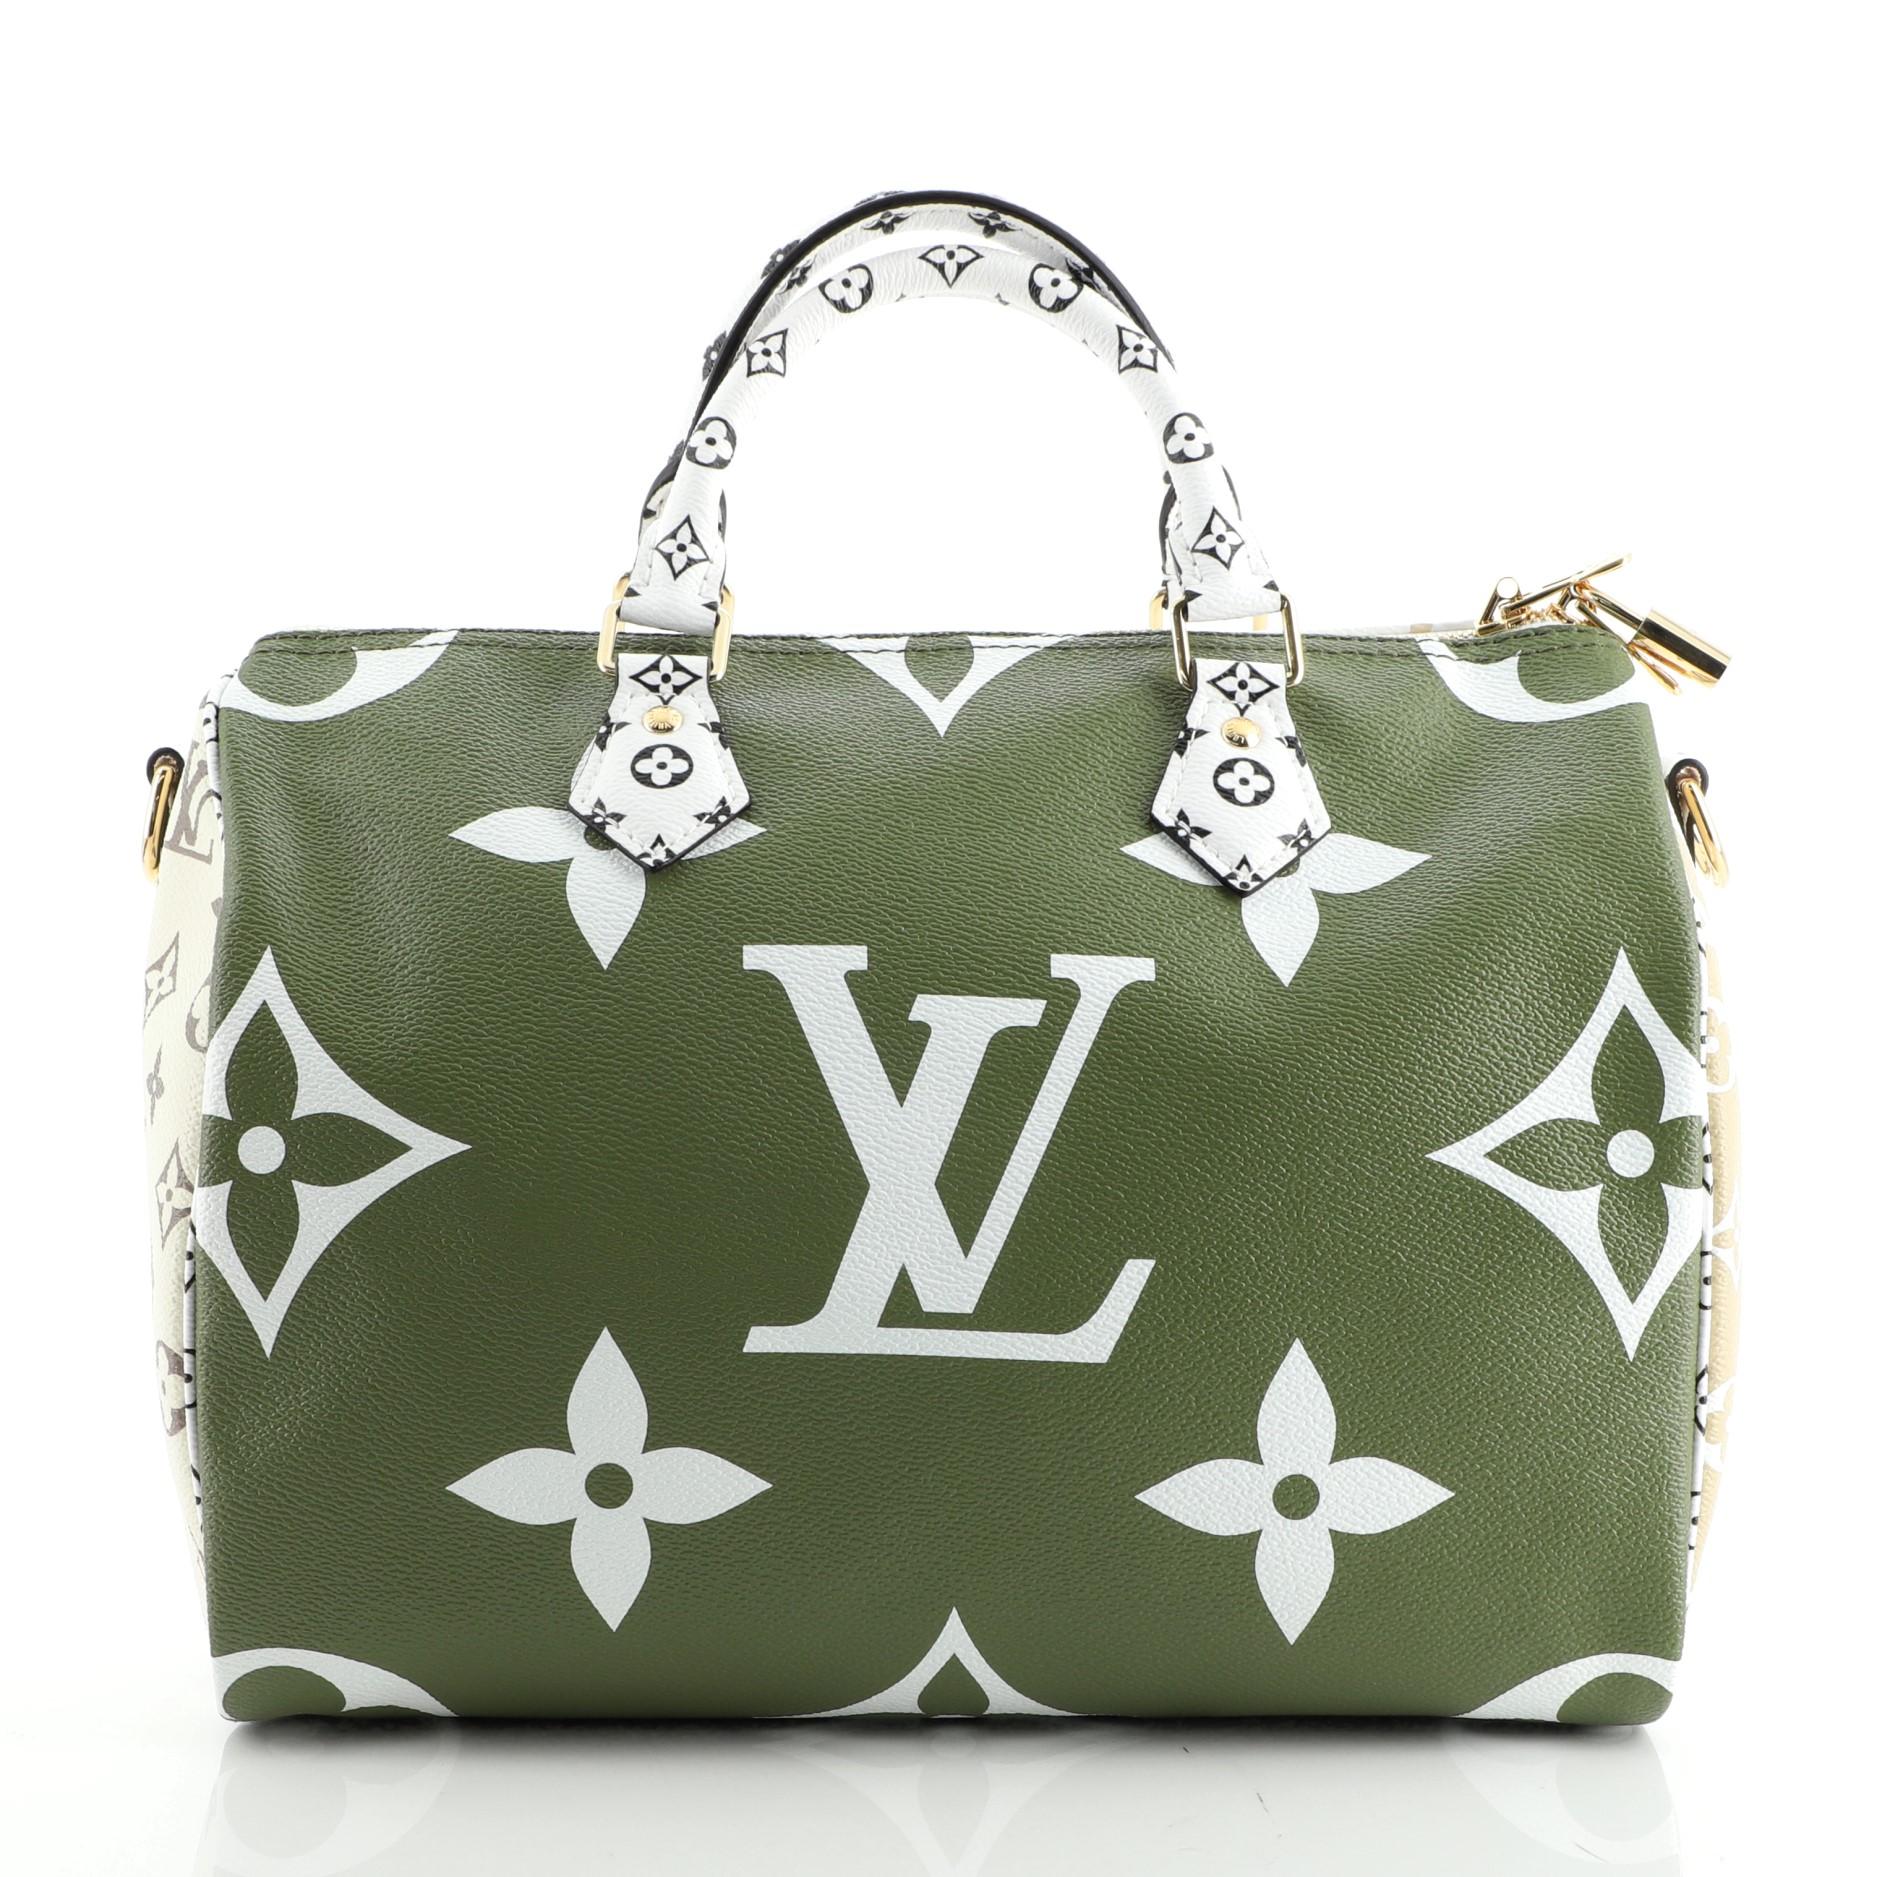 White Louis Vuitton Speedy Bandouliere Bag Limited Edition Colored Monogram Gia